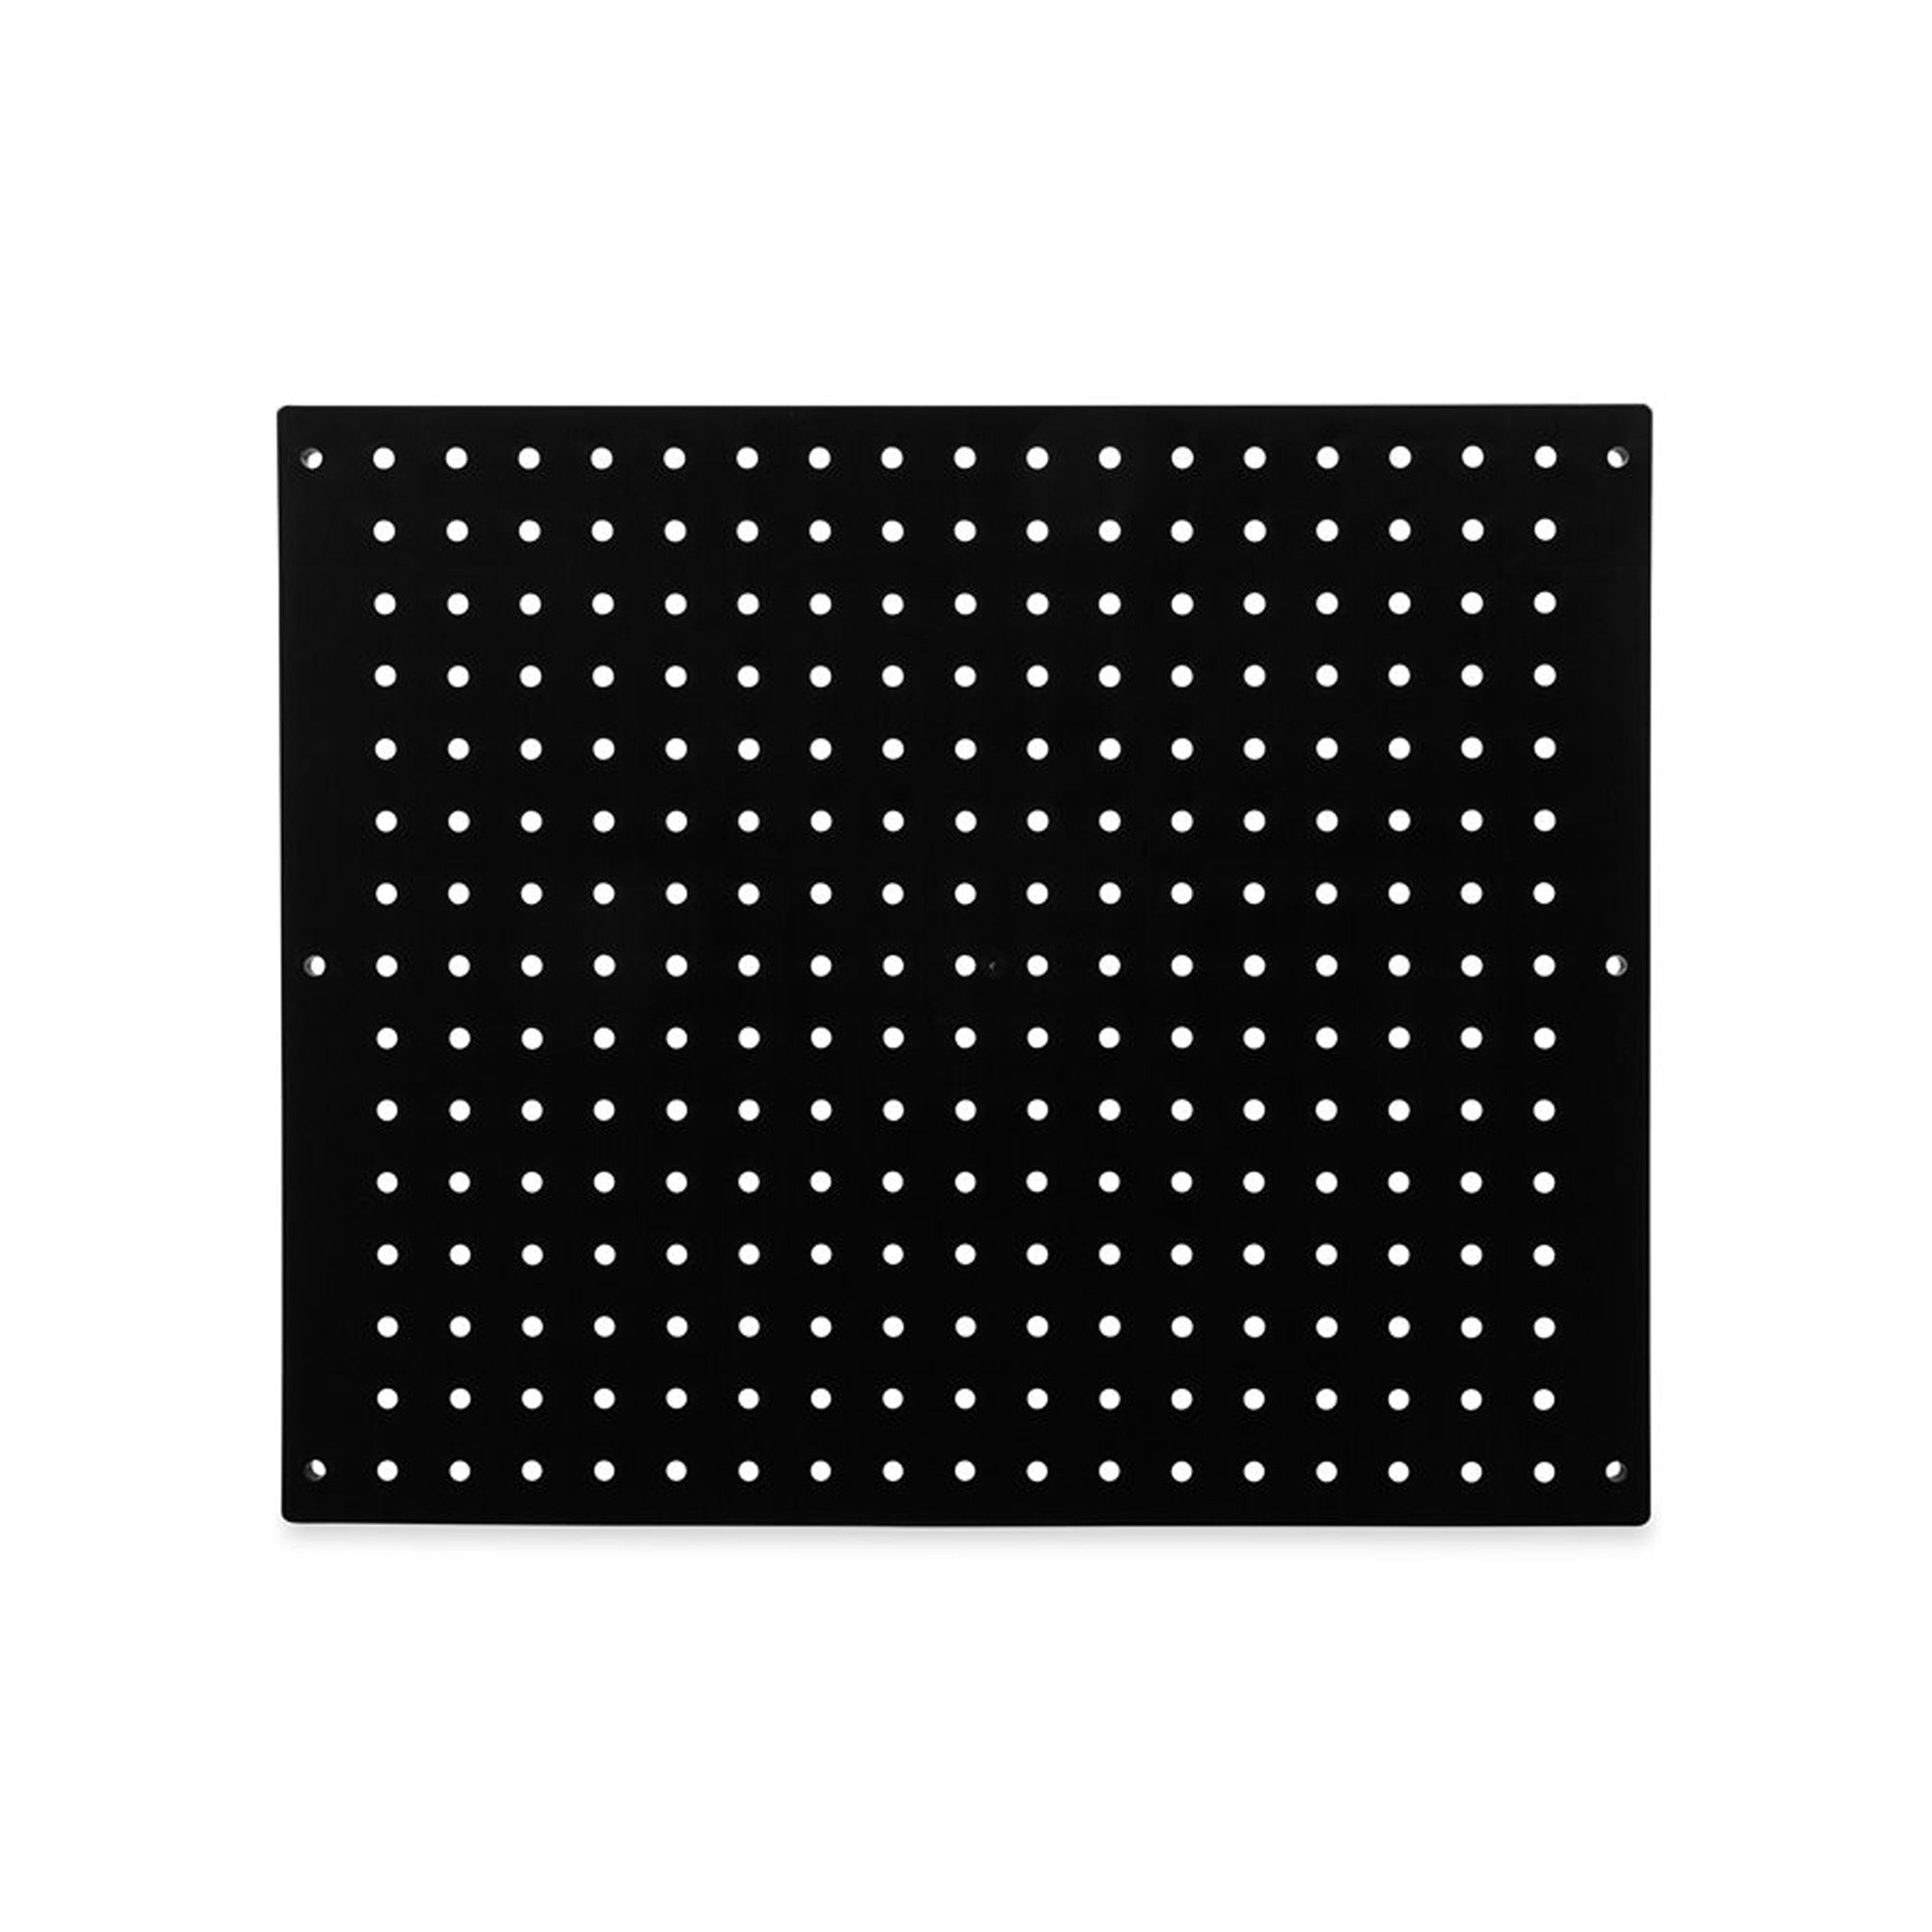 Camco 42300 Peg Board - 19" x 15.5" x 0.44", 2/Pack